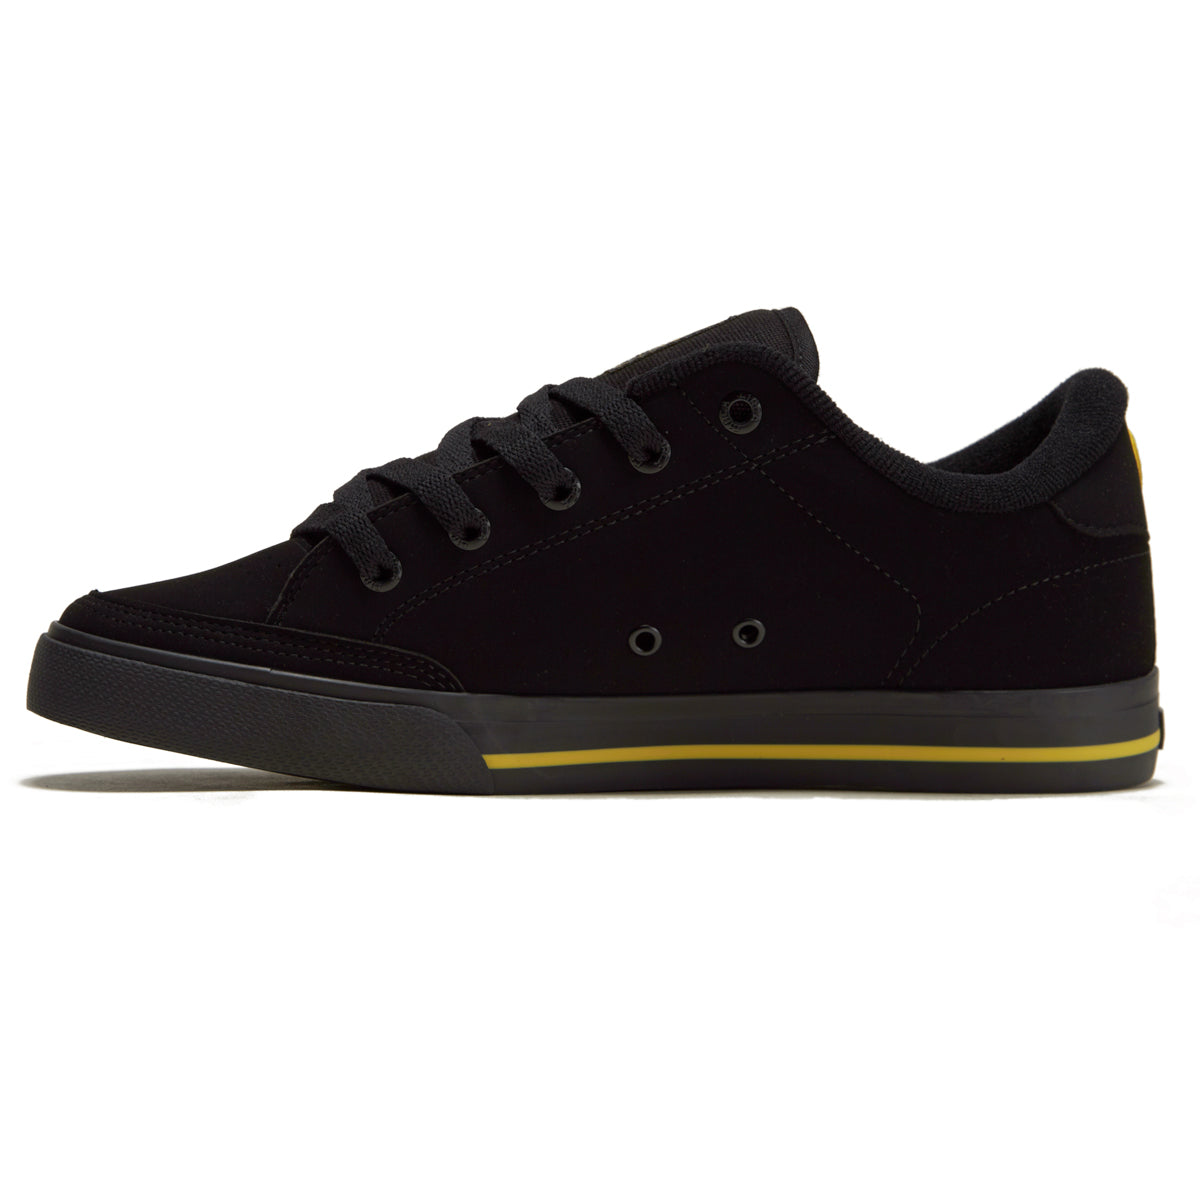 C1rca Buckler SK Shoes - Black/Spectra Yellow image 2